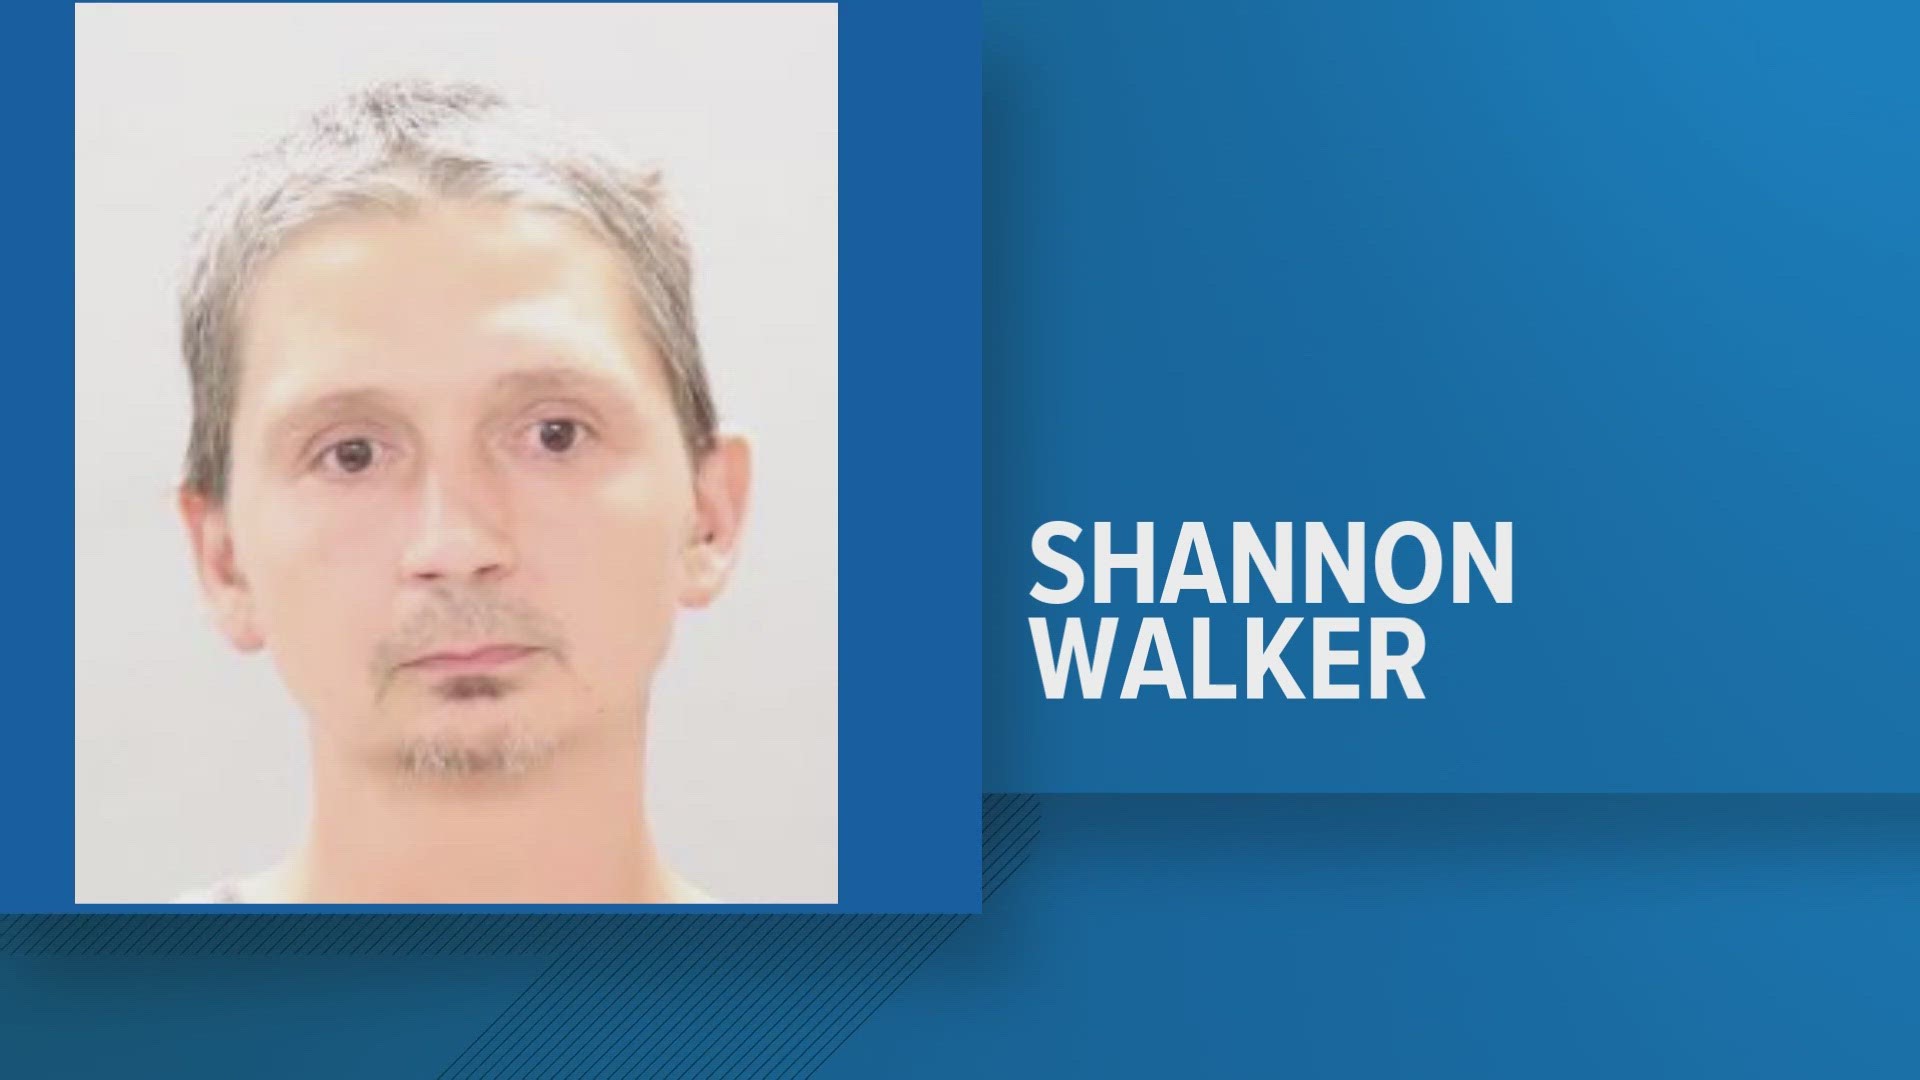 Shannon Walker was arrested in 2000, 2001 and 2004, according to court records.